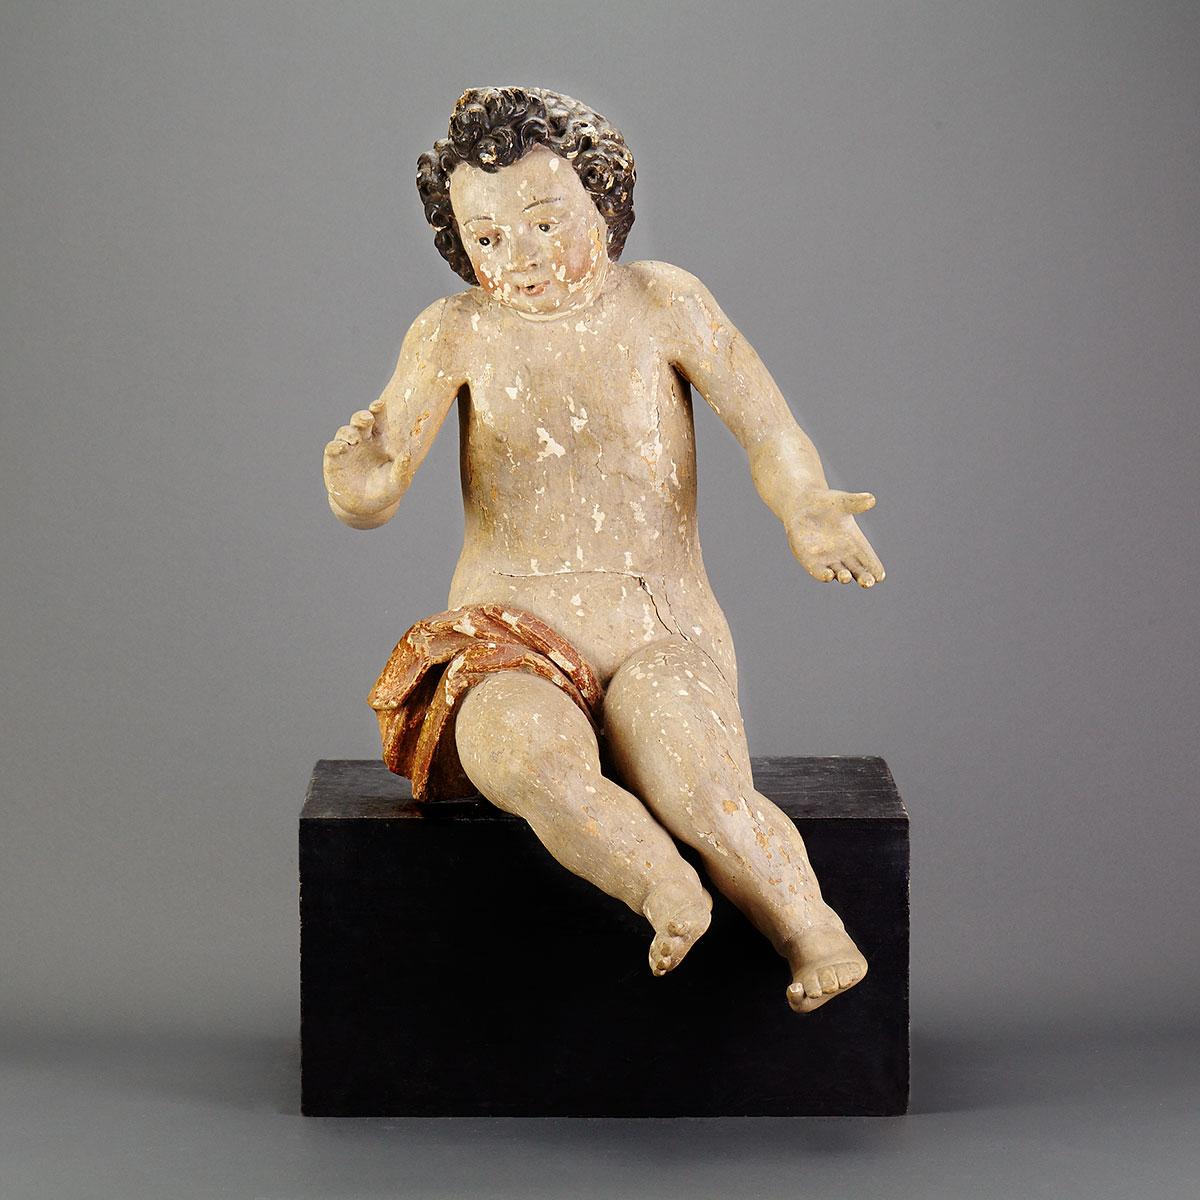 Italian Carved and Polychromed Figure of a Cherub, early 19h century